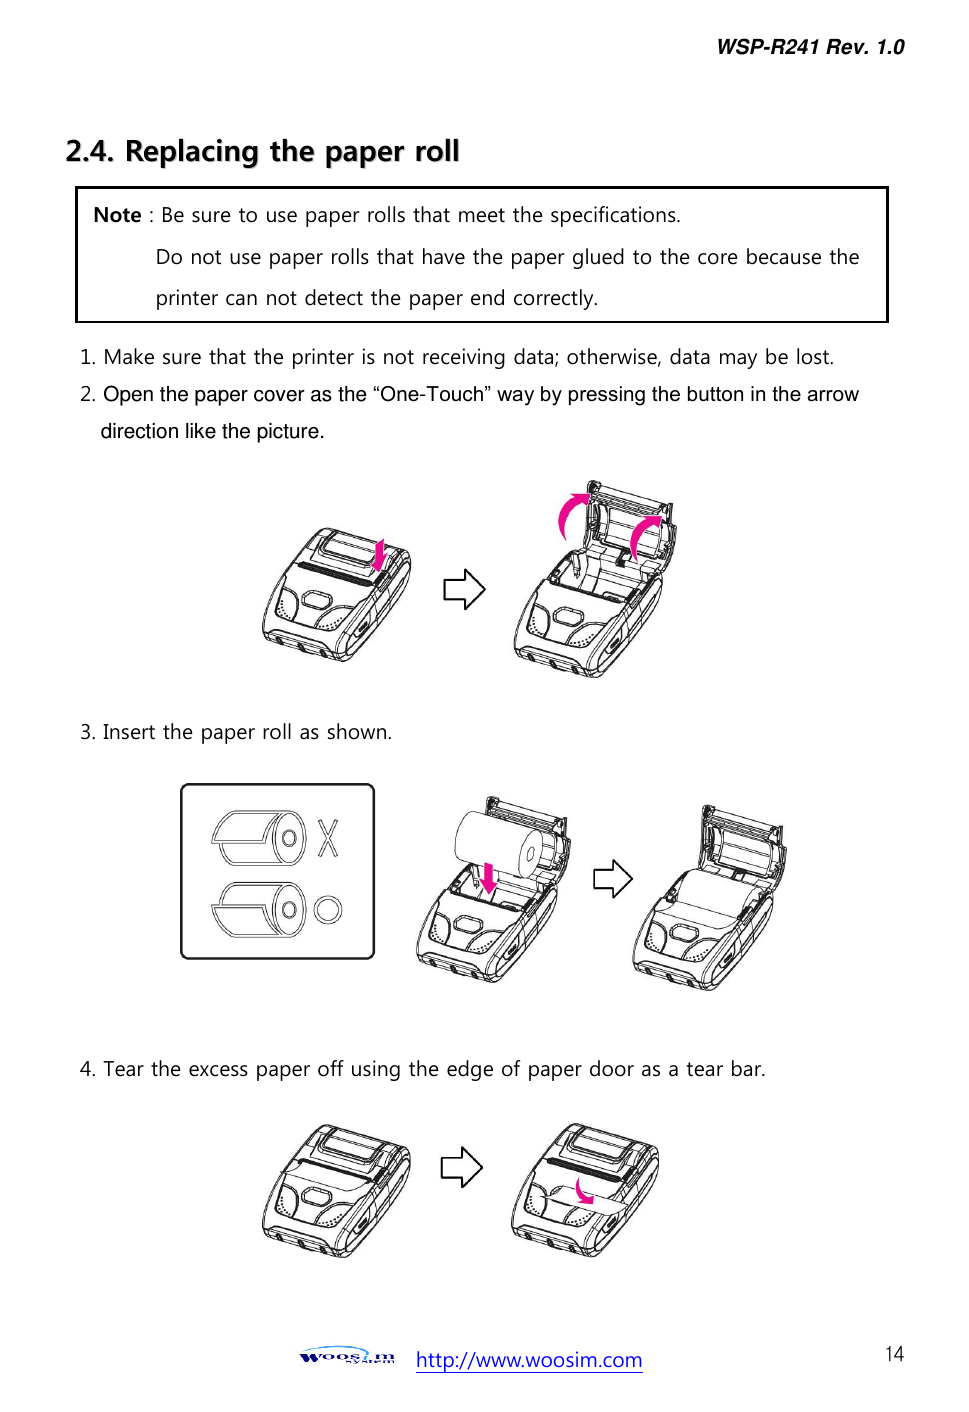 WSP-R241 Rev. 1.0    http://www.woosim.com 14 22..44..  RReeppllaacciinngg  tthhee  ppaappeerr  rroollll                                    1. Make sure that the printer is not receiving data; otherwise, data may be lost. 2. Open the paper cover as the “One-Touch” way by pressing the button in the arrow direction like the picture.        3. Insert the paper roll as shown.         4. Tear the excess paper off using the edge of paper door as a tear bar.  Note : Be sure to use paper rolls that meet the specifications.   Do not use paper rolls that have the paper glued to the core because the   printer can not detect the paper end correctly.     